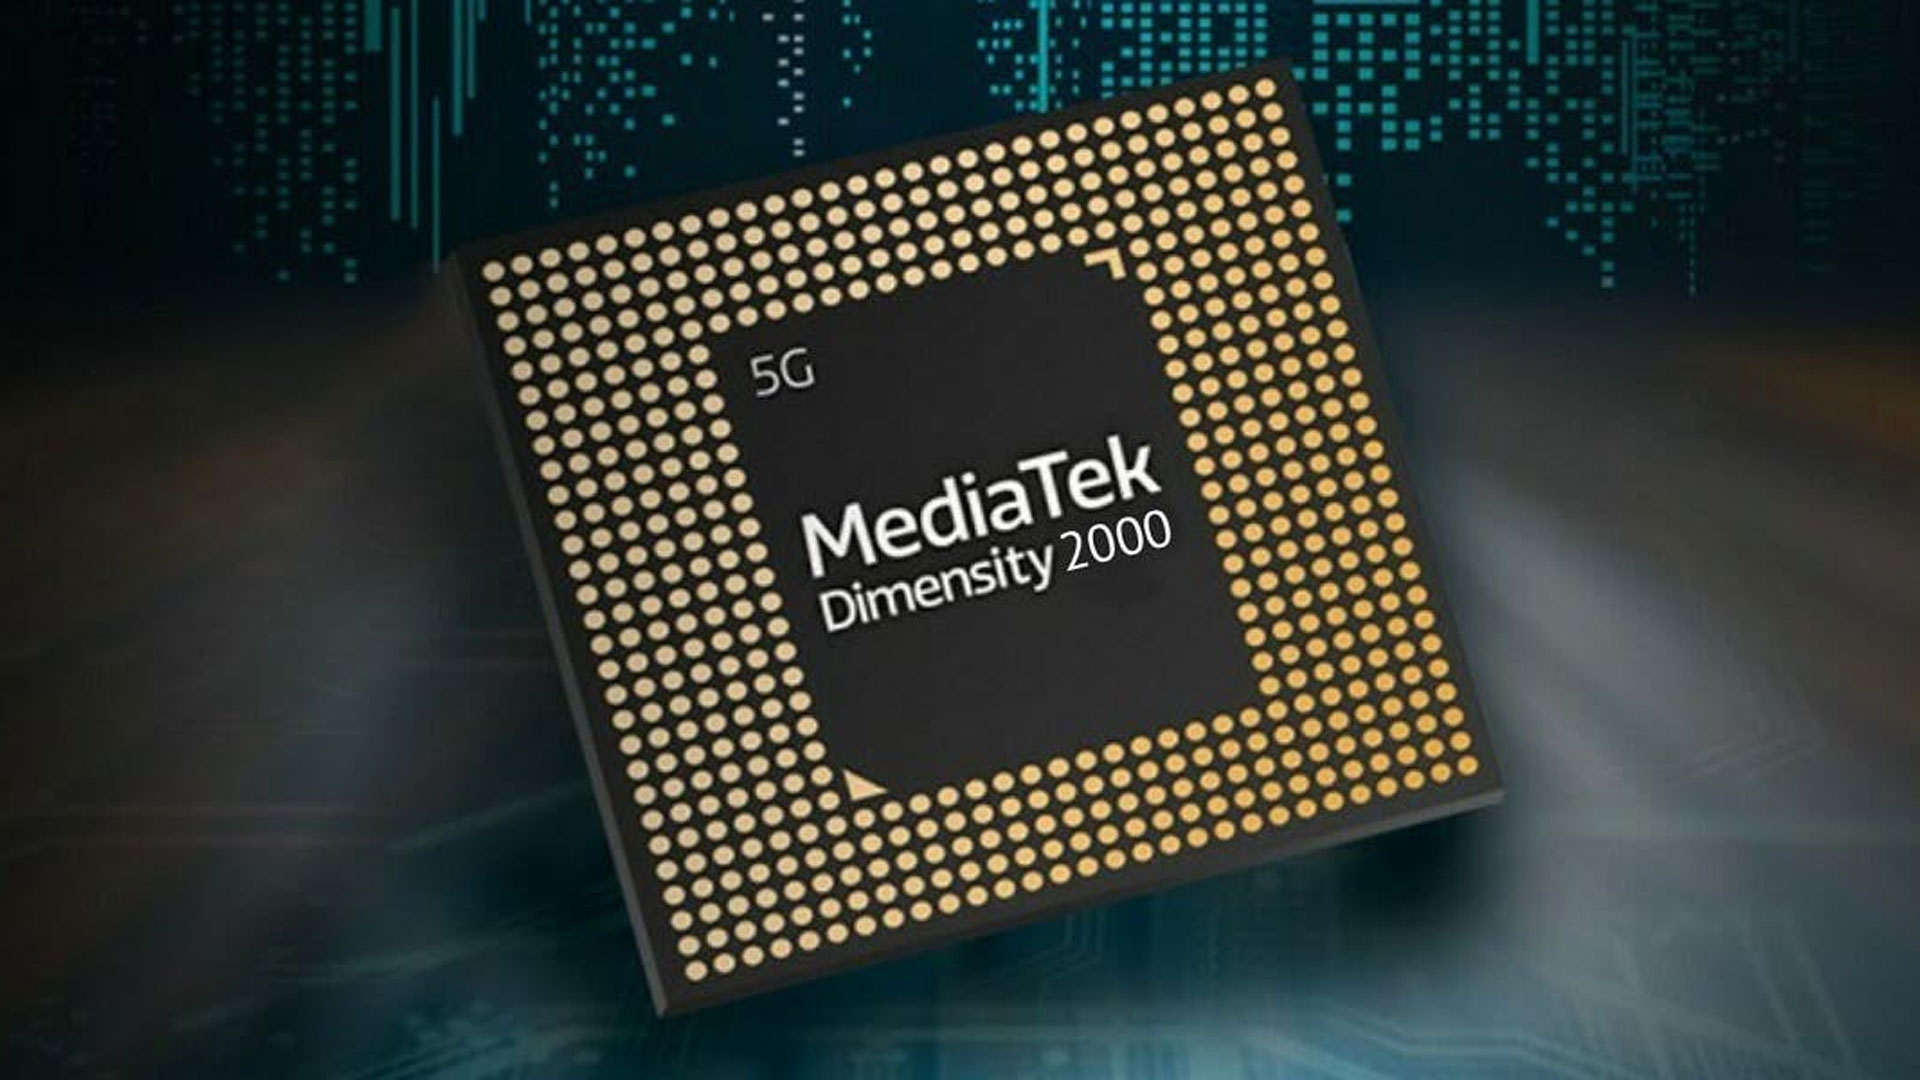 MediaTek smartphone scores over 1 million points on AnTuTu for the first time